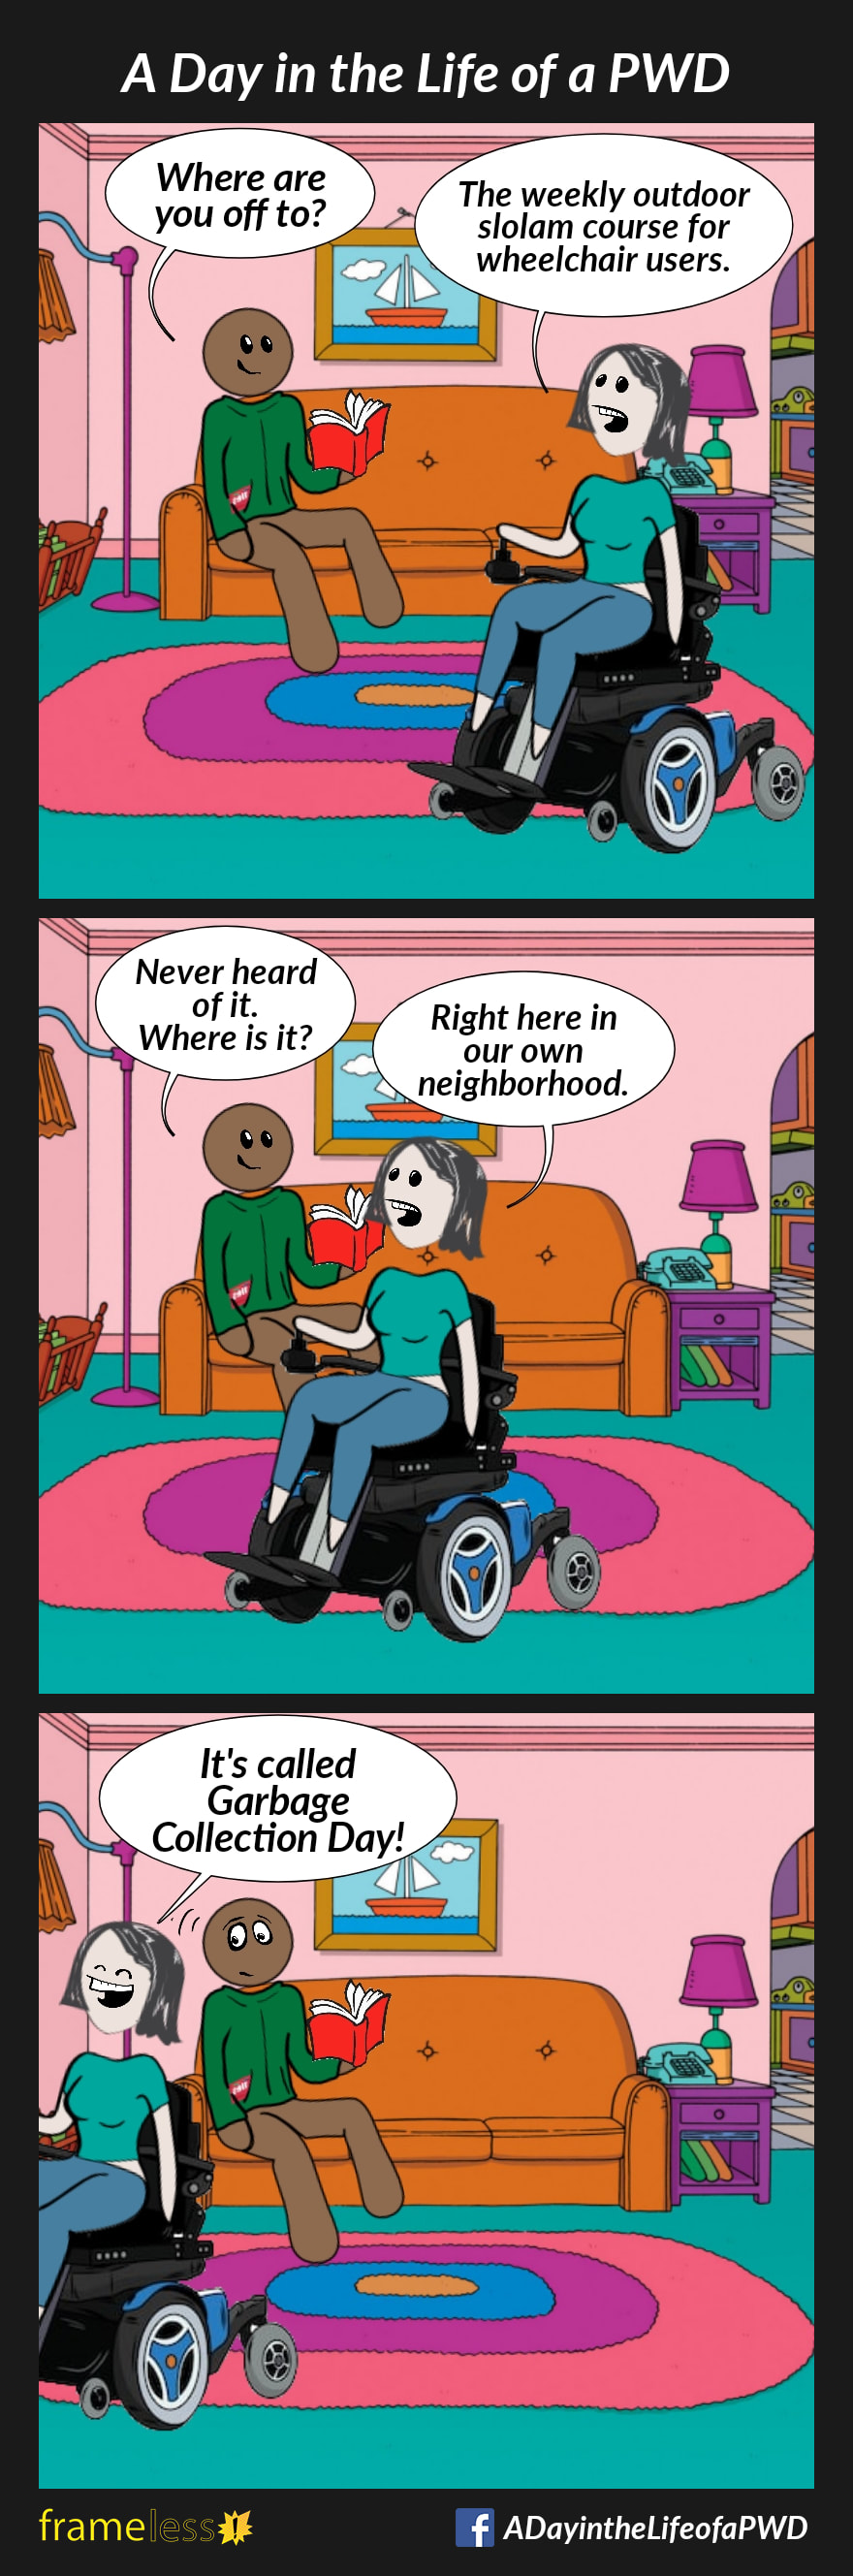 COMIC STRIP 
A Day in the Life of a PWD (Person With a Disability) 

Frame 1:
A woman in a power wheelchair is on her way out.
Her husband is sitting on the sofa, reading a book.
HUSBAND: Where are you off to?
WIFE: The weekly outdoor slalom course for wheelchair users. 

Frame 2:
HUSBAND: Never heard of it. Where is it?
WIFE: Right here in our own neighborhood. 

Frame 3:
WIFE: It's called Garbage Collection Day!